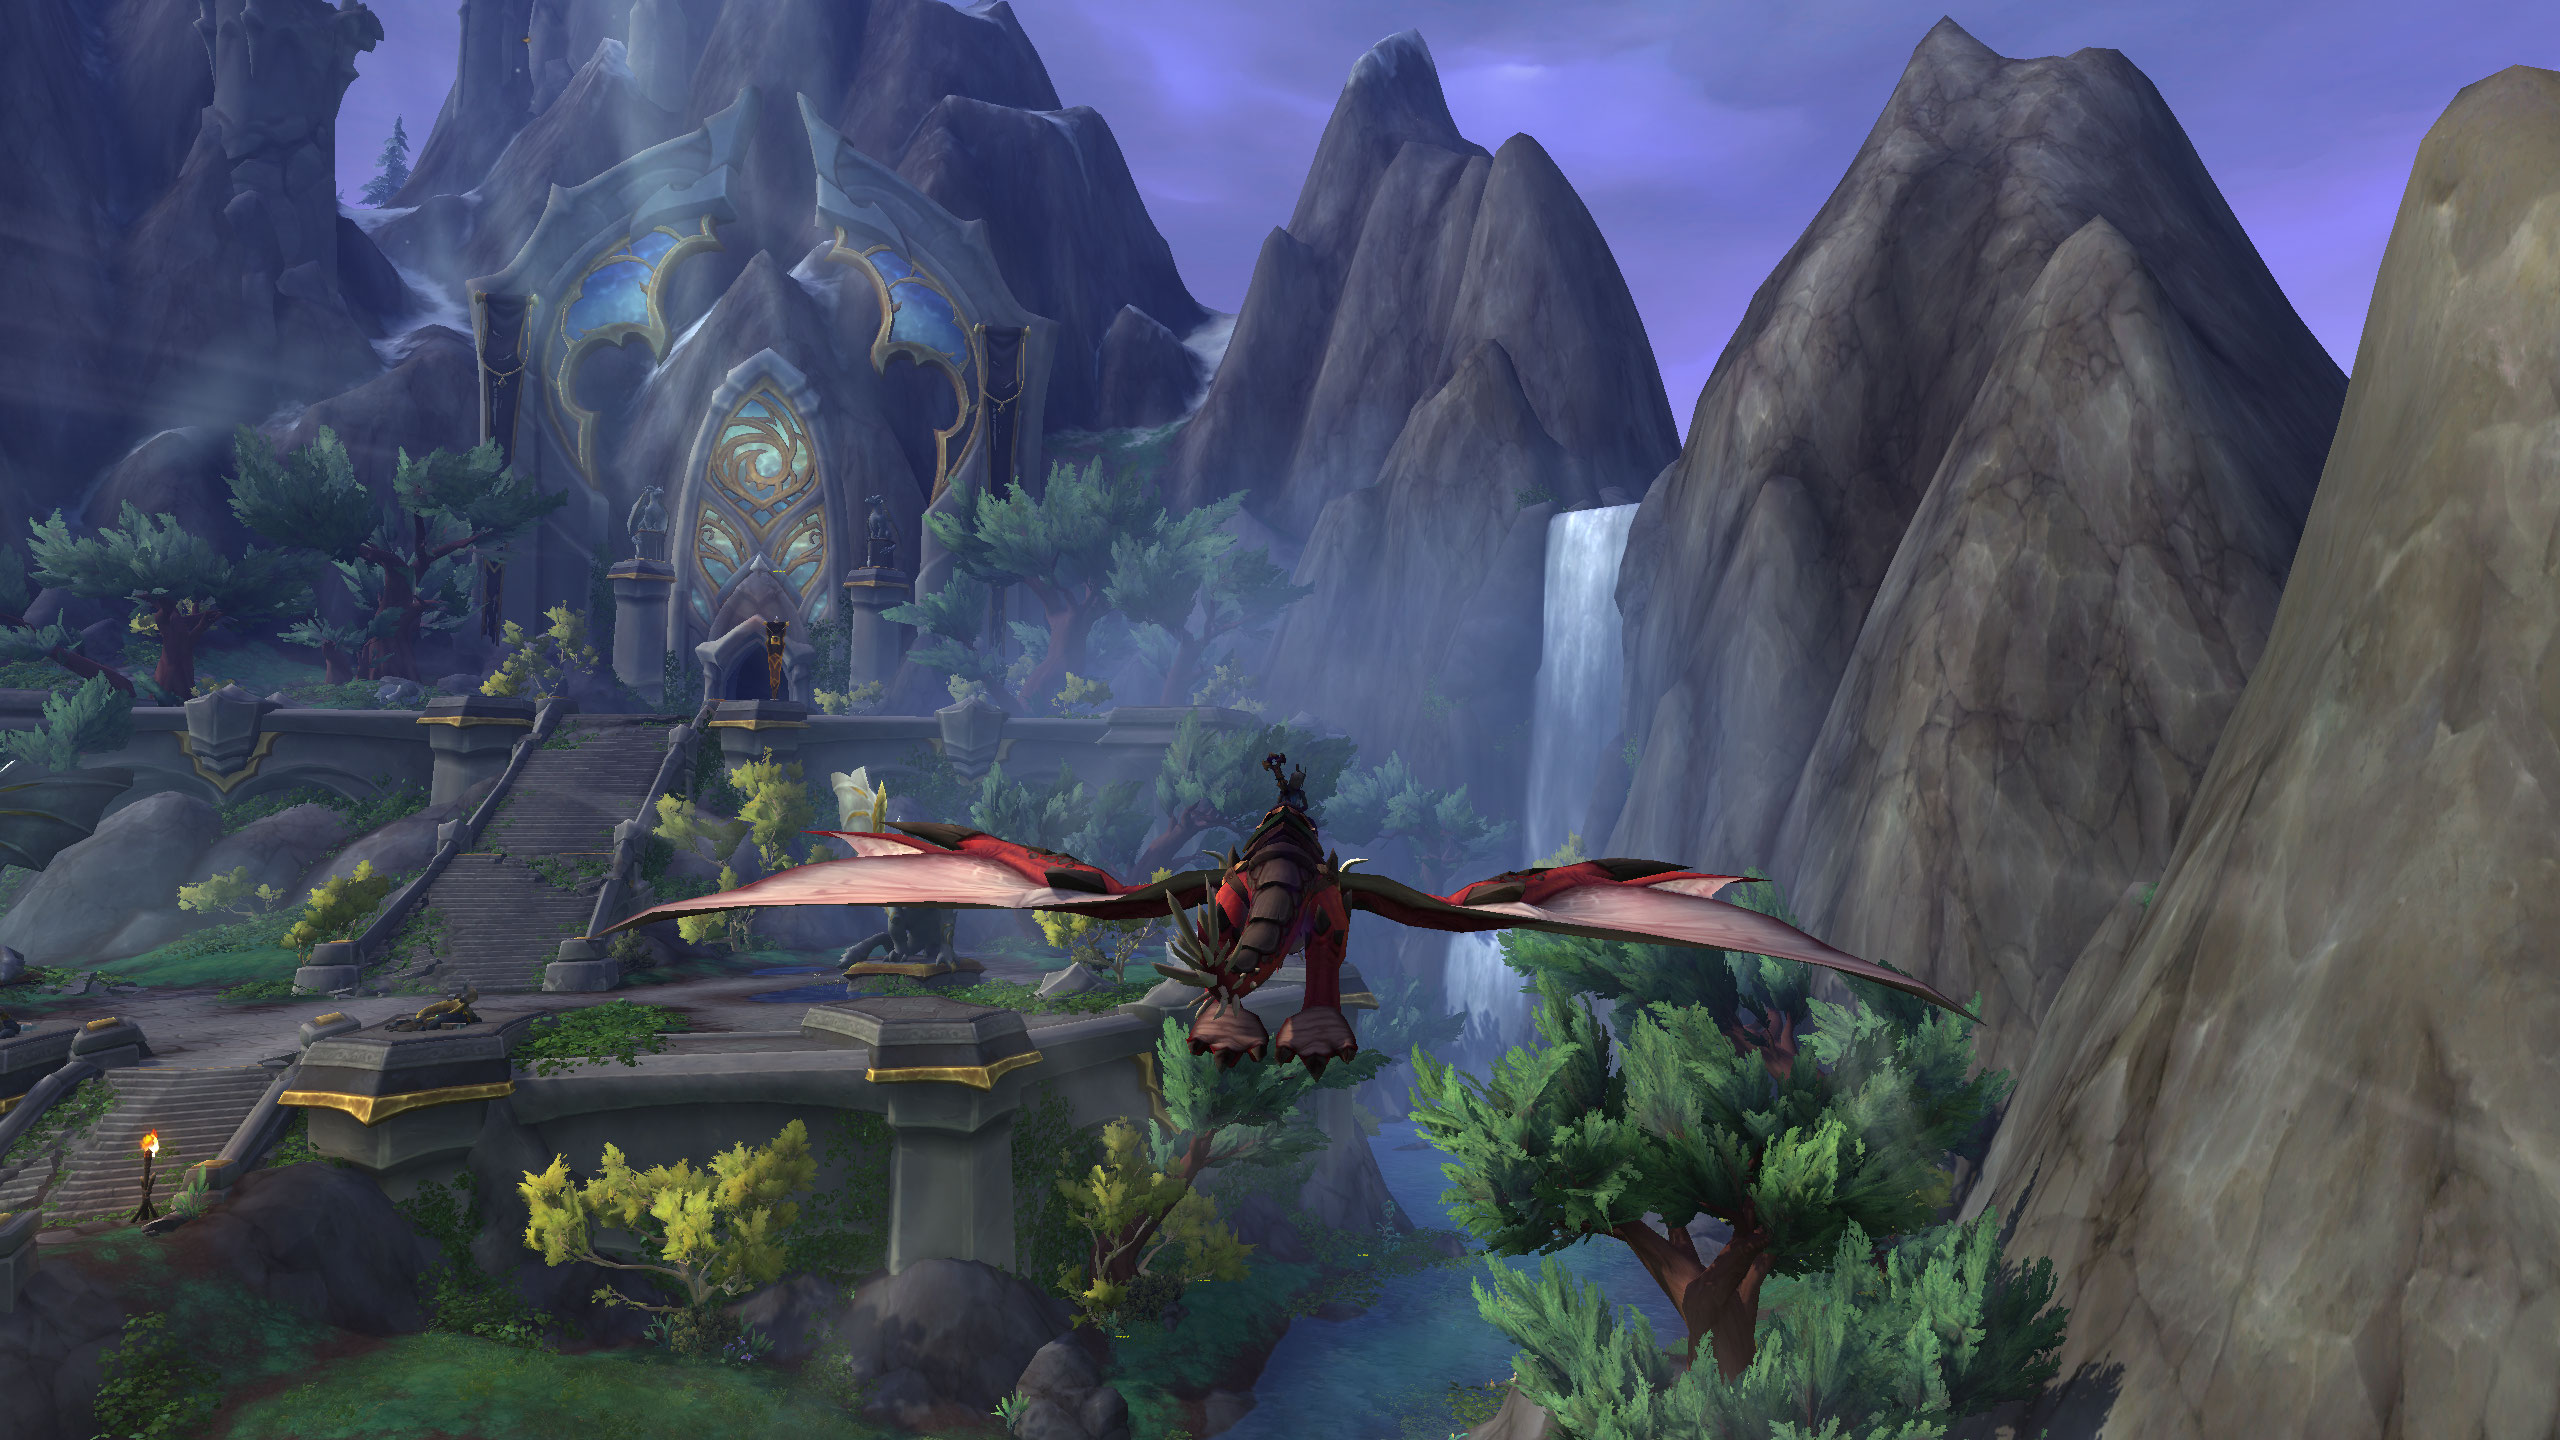 a player is flying a dragon towards a building carved into a mountain